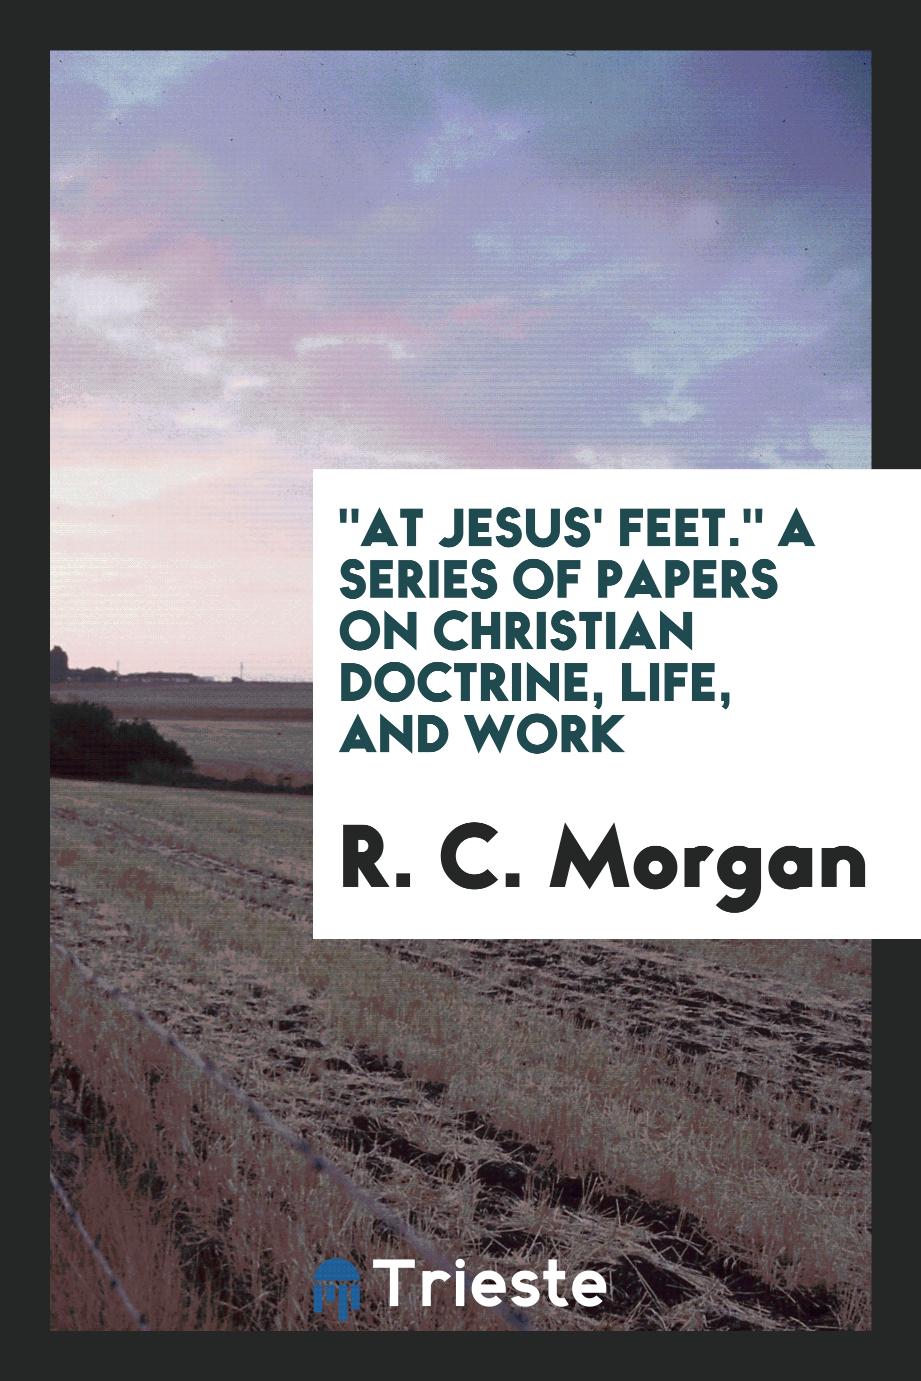 "At Jesus' feet." A series of papers on Christian doctrine, life, and work